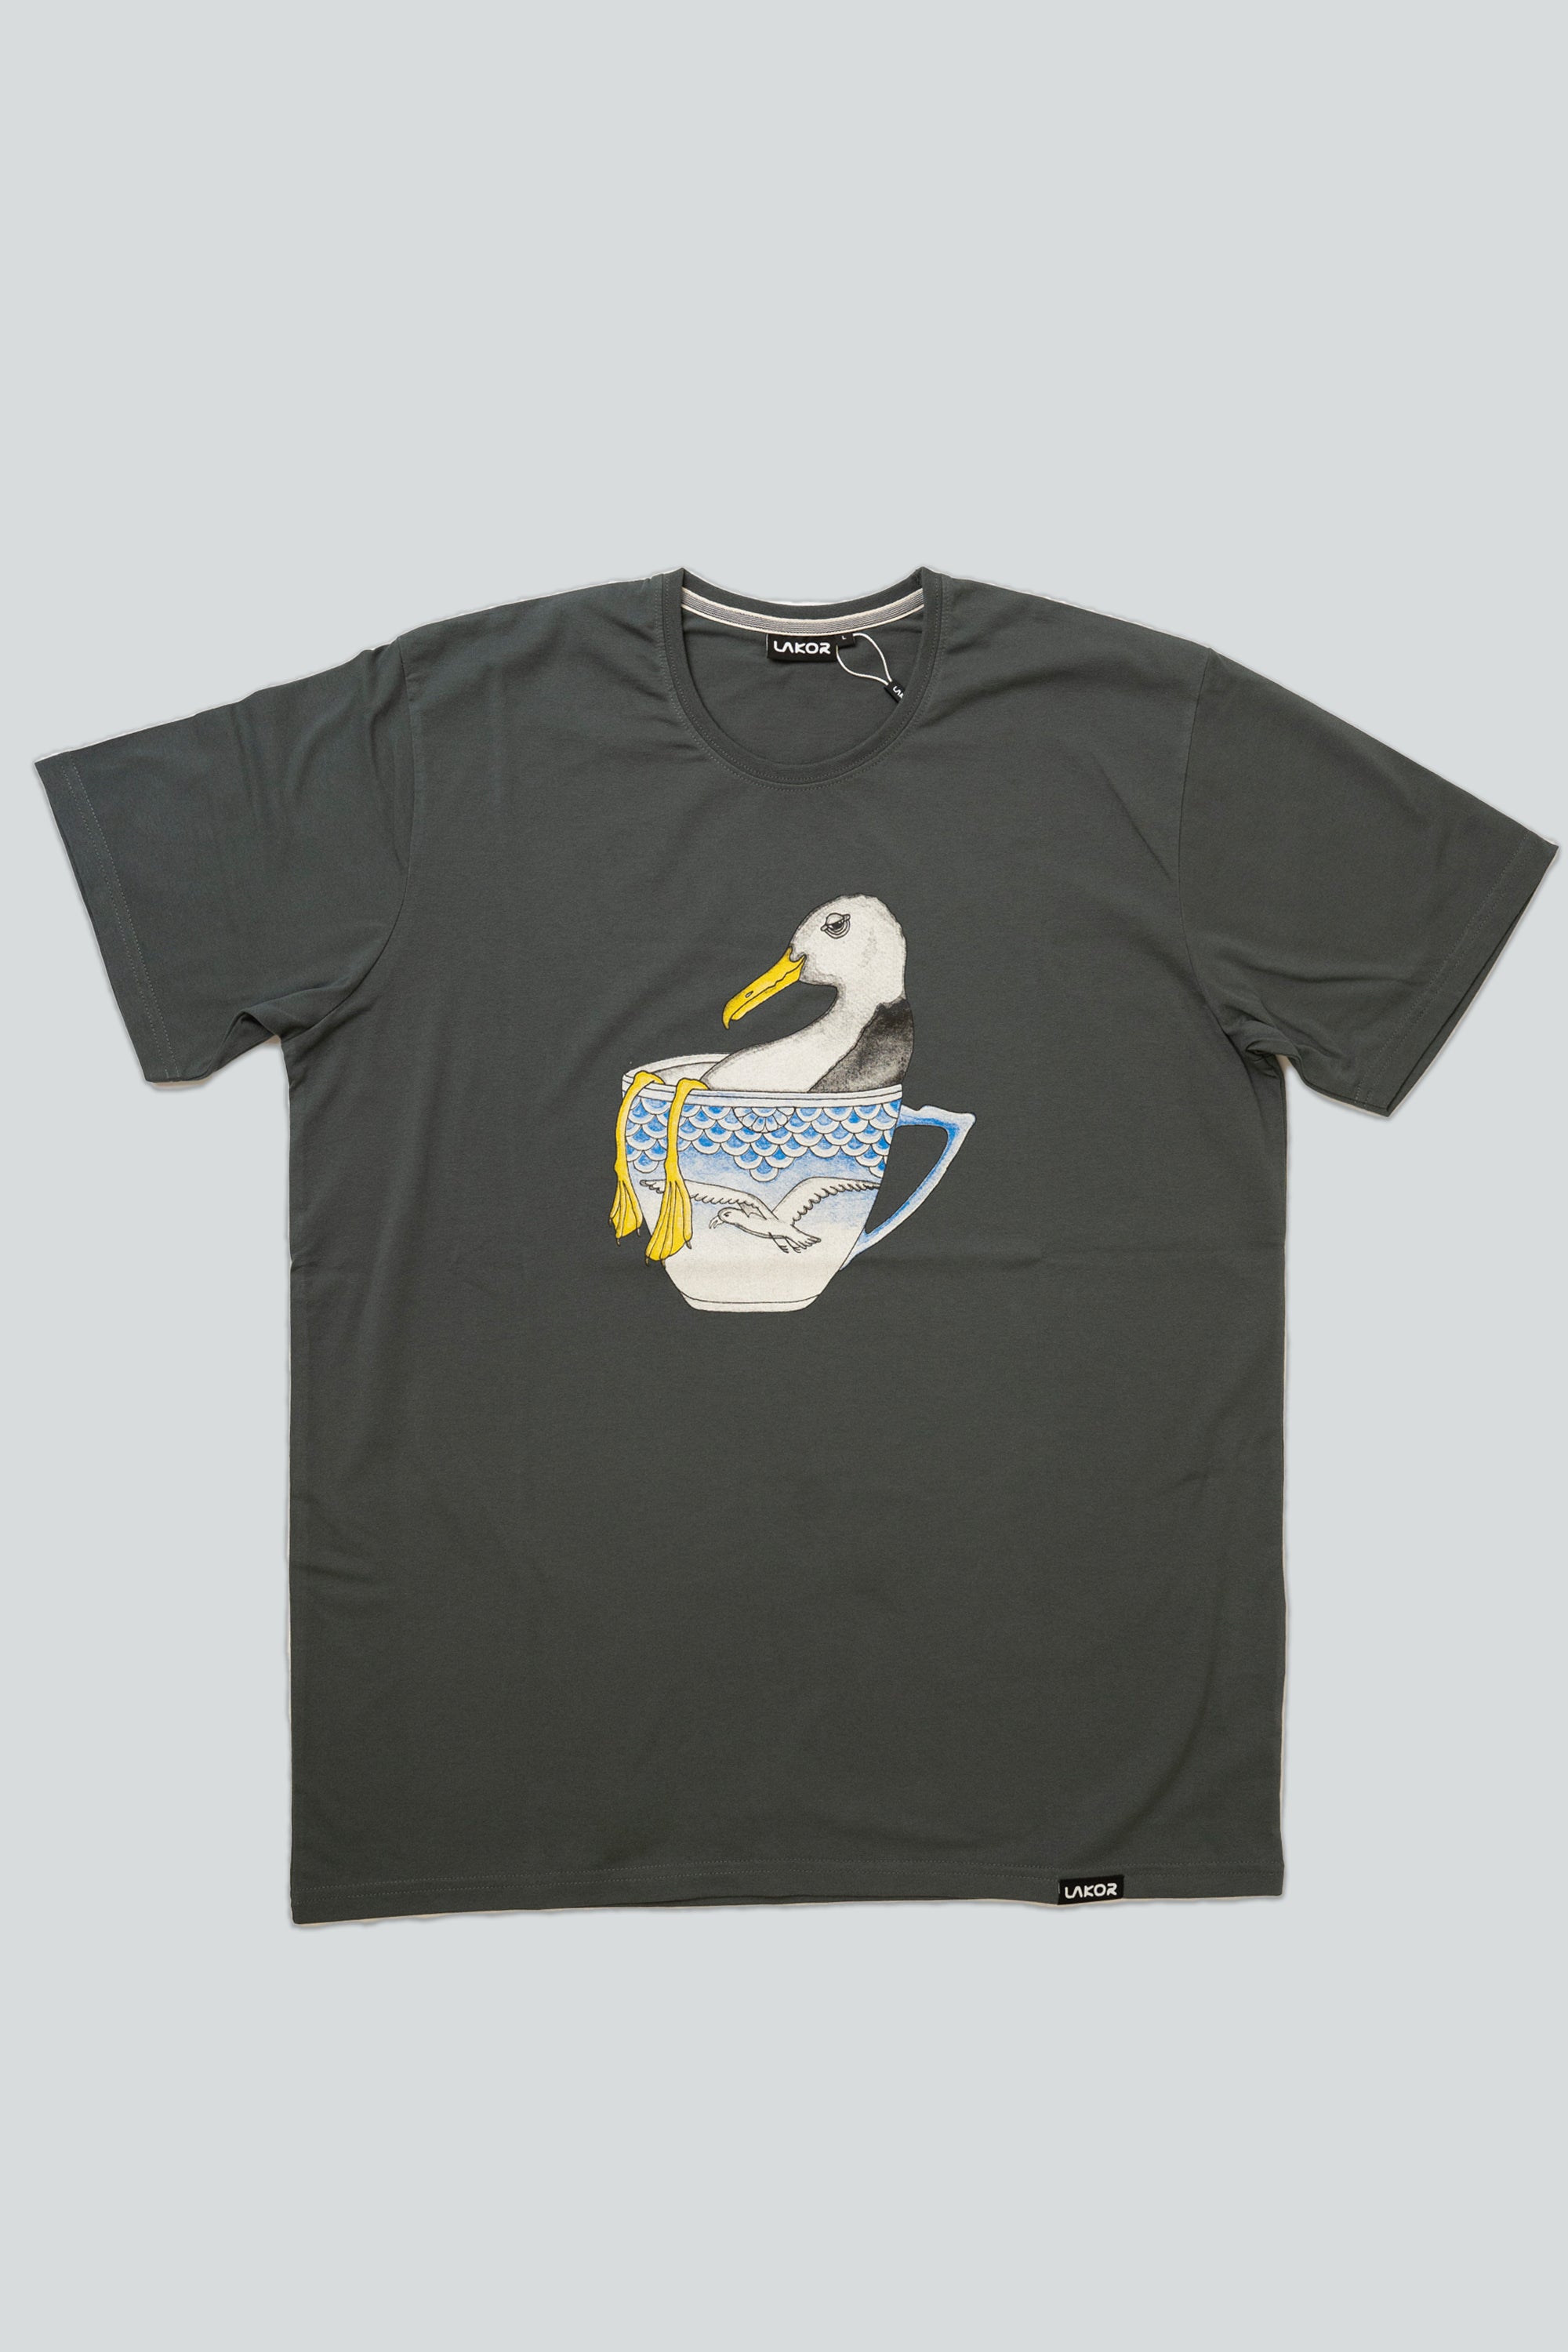 Seagull In A Cup T-shirt (Urban Chic)